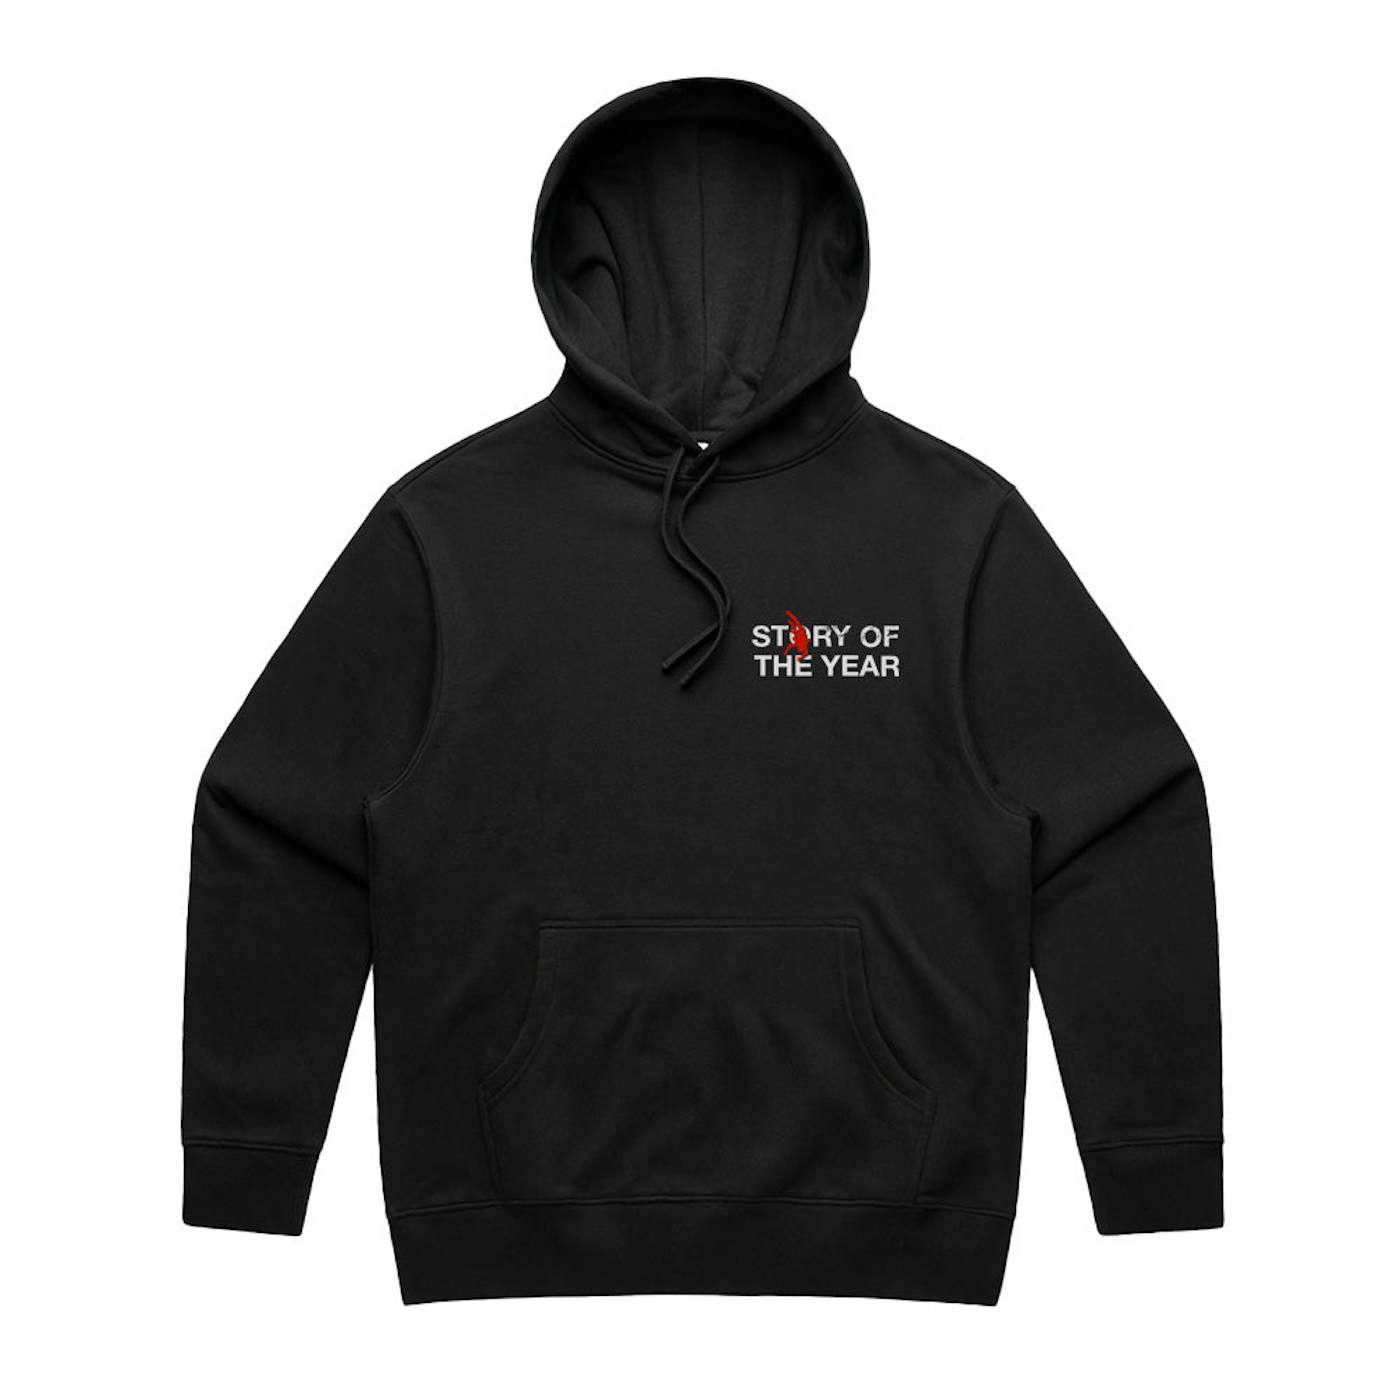 Story Of The Year - Page Avenue Hoodie